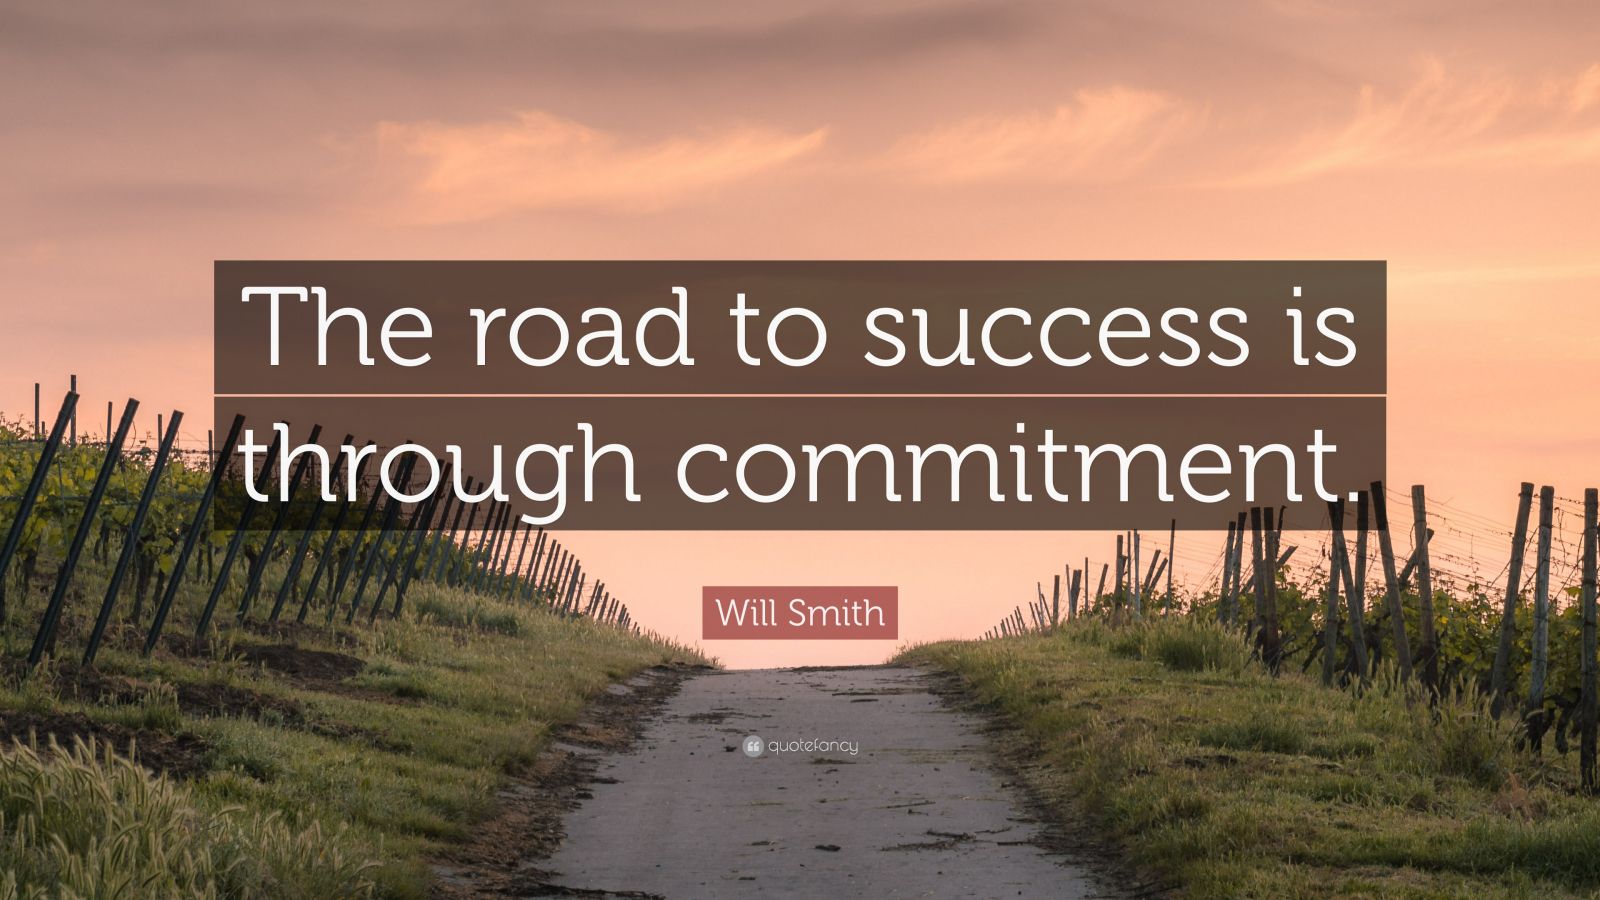 Will Smith Quote: “The road to success is through commitment.” (12 ...